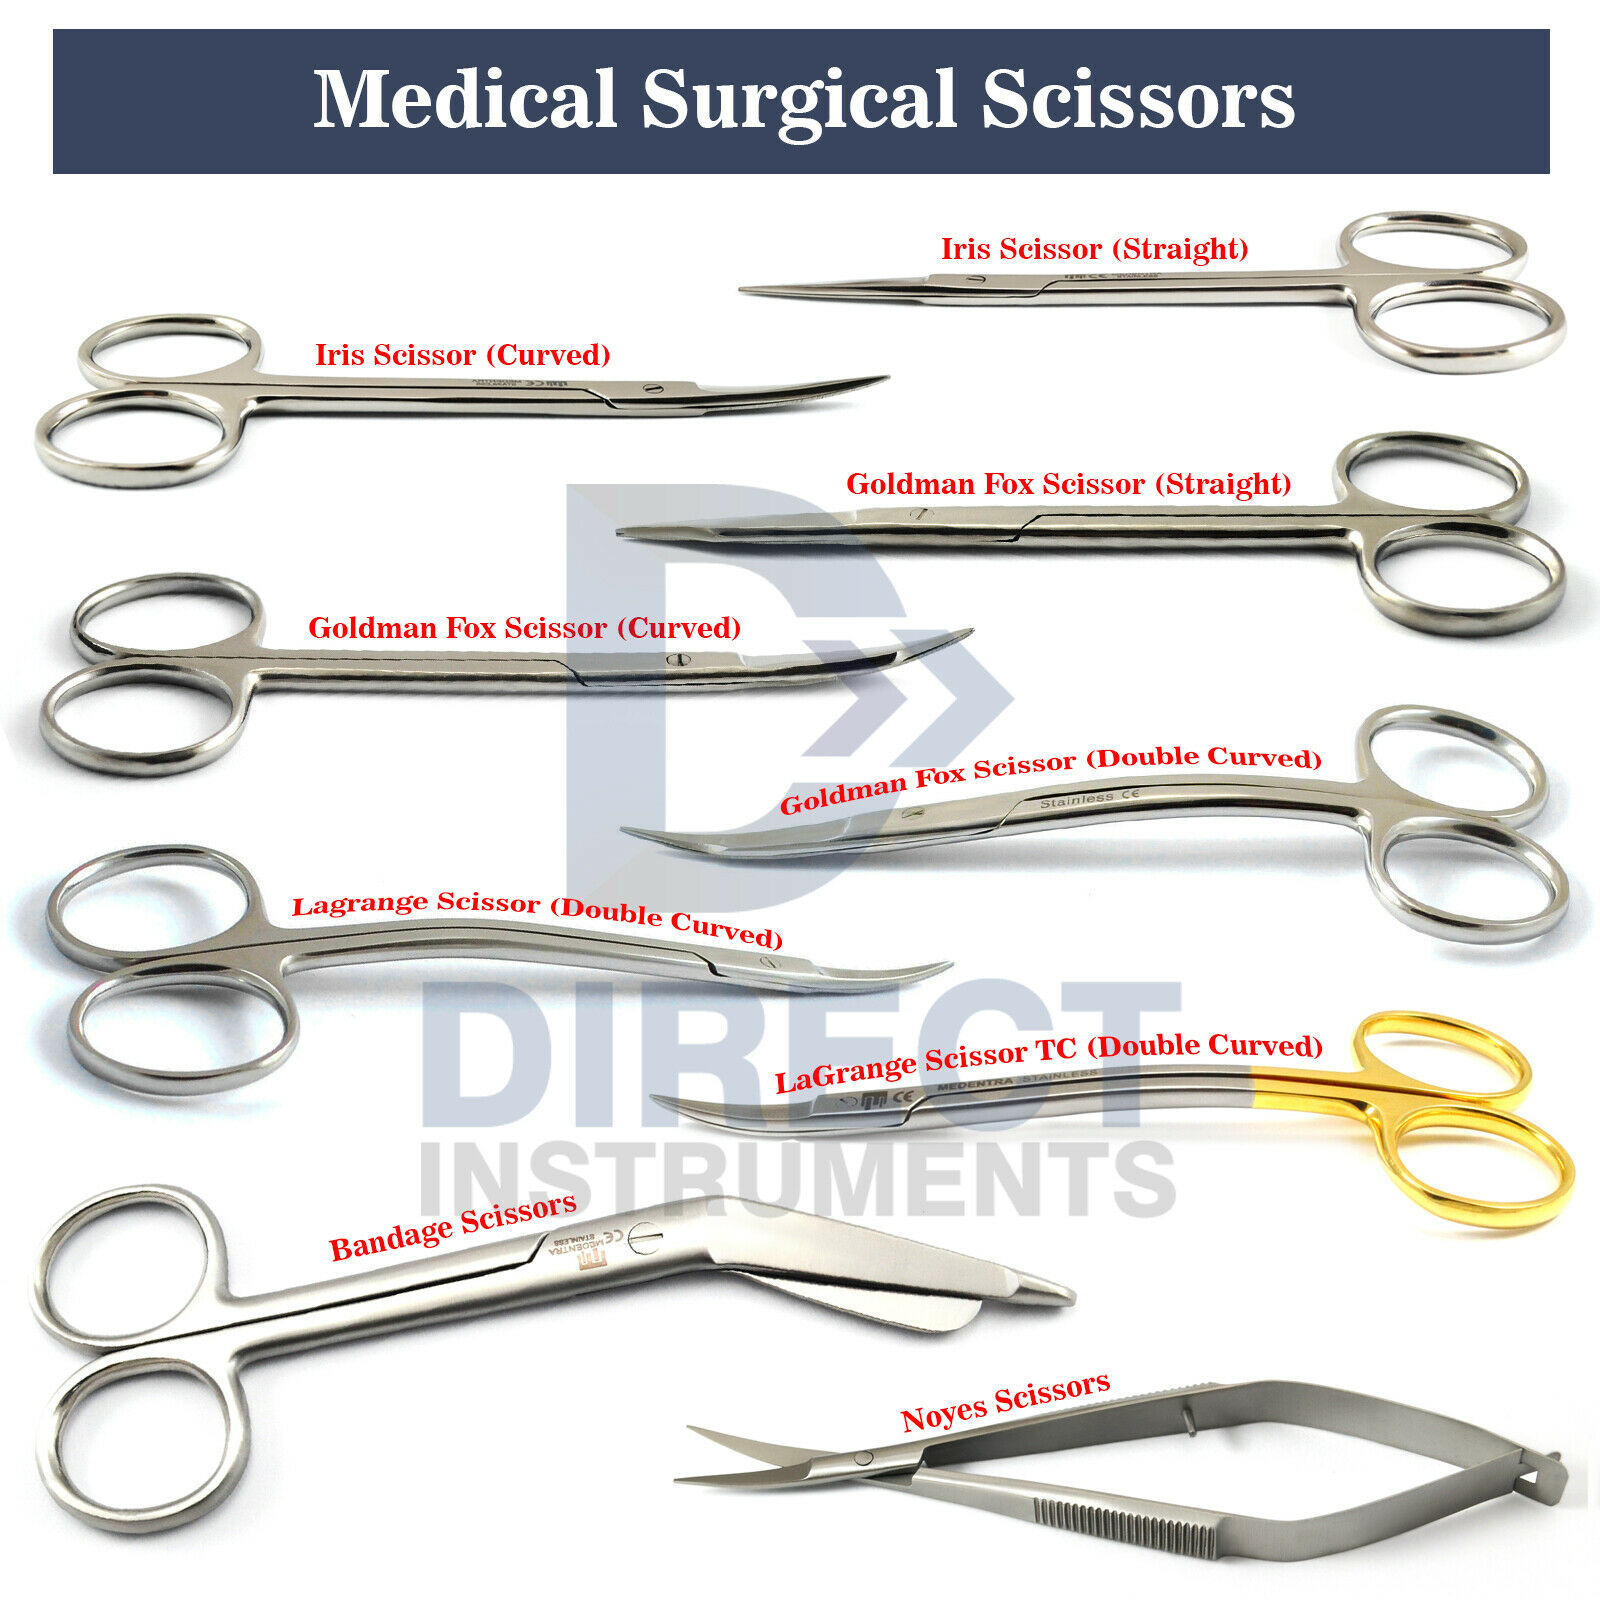 Medentra Surgical Scissors Medical Dental Veterinary Microsurgery Dissecting New